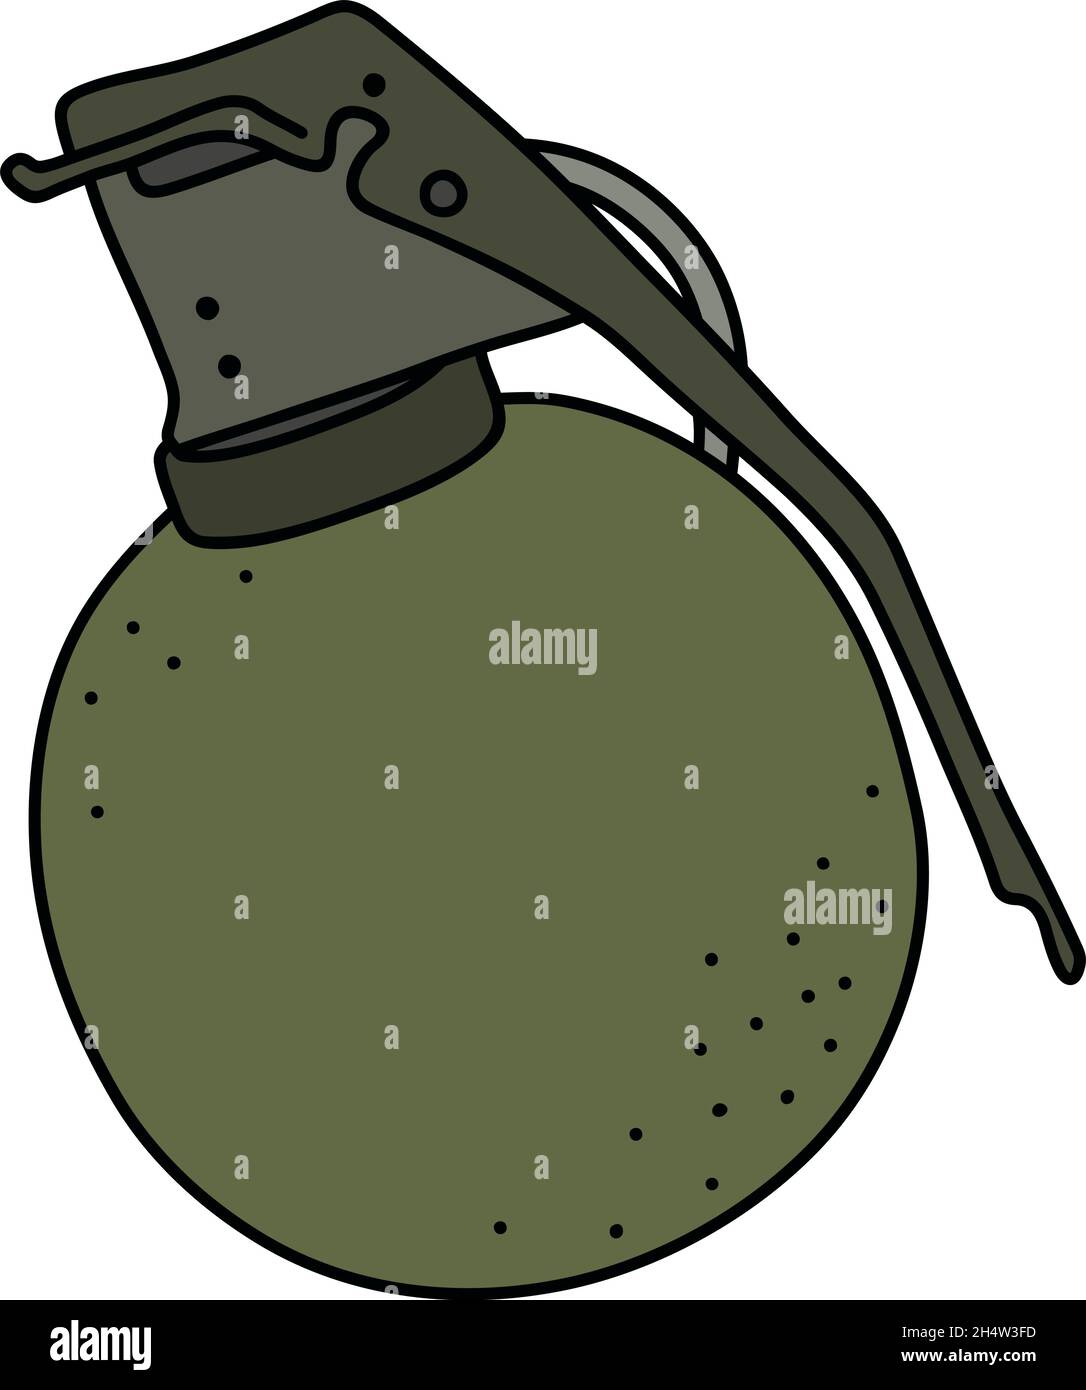 The old khaki offensive hand grenade Stock Vector